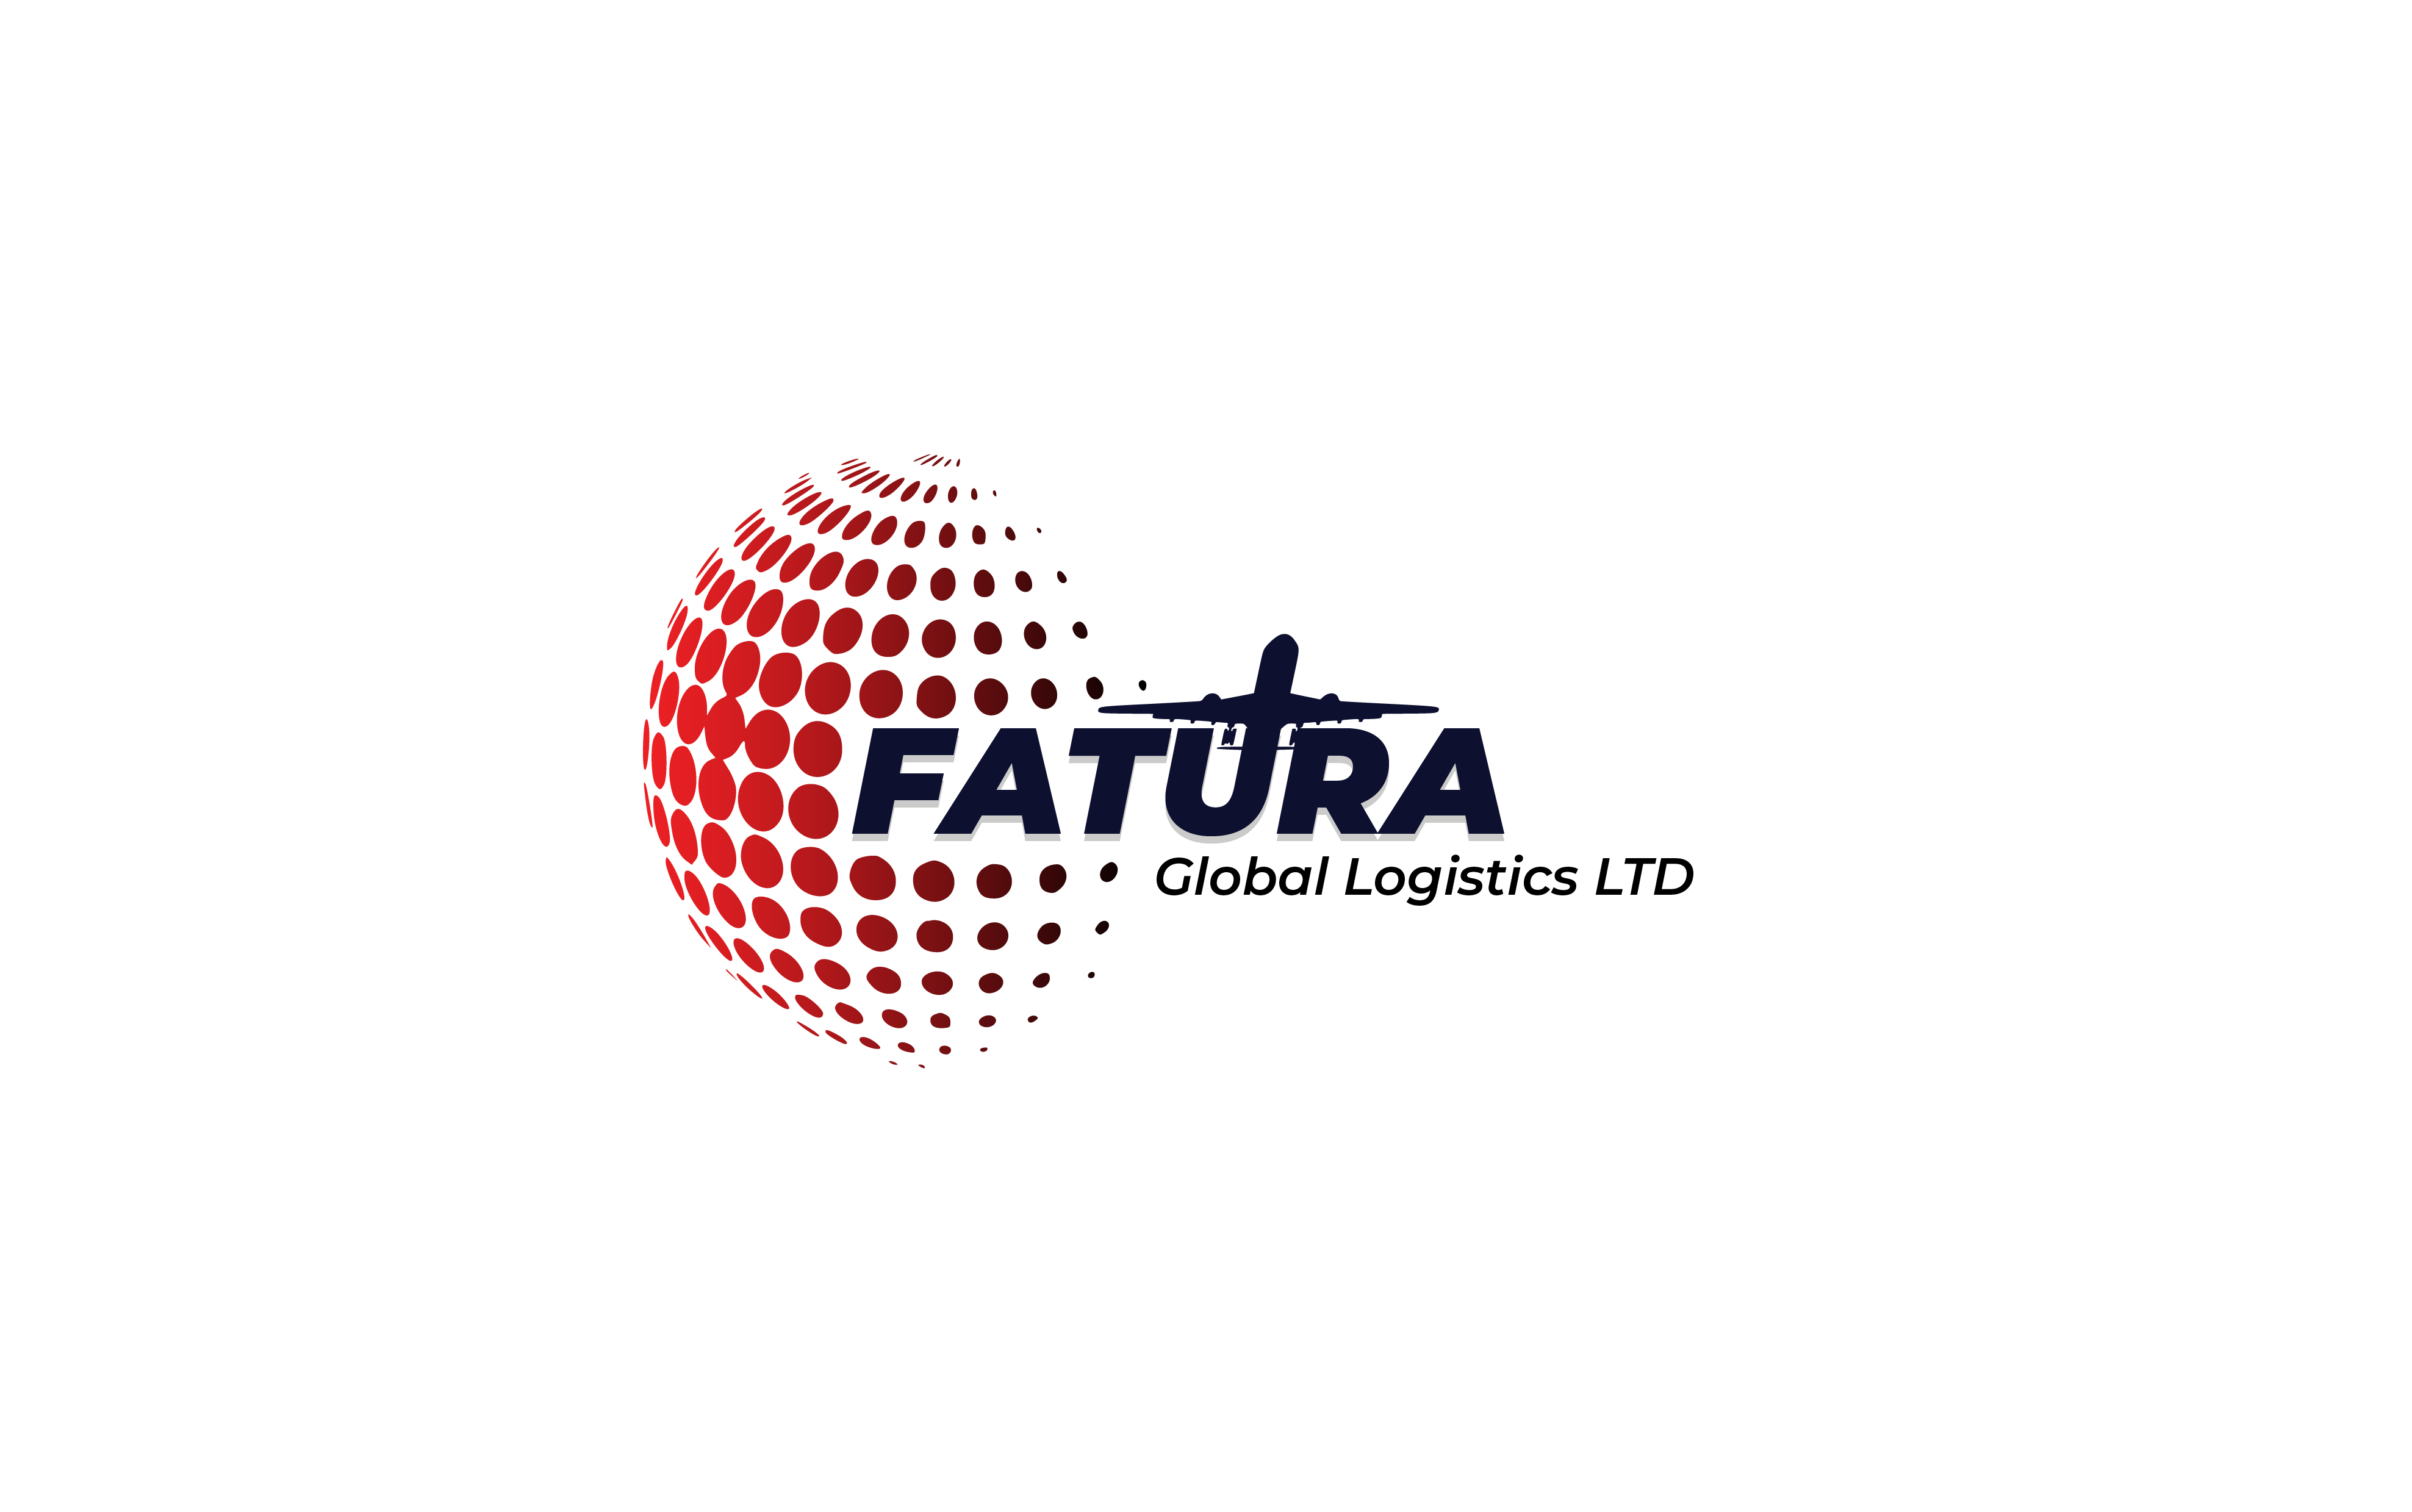 Fatura logistics LTD Logo Design in Nairobi Kenya. The Best Logo Design Company in Nairobi, Kenya, Kampala, Uganda, Dar es Salaam, Kigali, Rwanda, Juba, South Sudan, and Mogadishu, Somalia is Galactik IT. Galactik IT provides corporate, governmental, non-profit, and small- and medium-sized business clients with expert logo graphics design services. With an expert working on your brand visuals at each stage, Galactik IT offers a logo design thorough process in Nairobi, Kenya that smoothly takes you from planning to post-launch. Galactik IT never skimped on quality. Galactik IT builds beautifully made, effective logo by by hand. Logo, company profile, business card, letterhead, brochure, social media posters, flyers designers in nairobi kenya